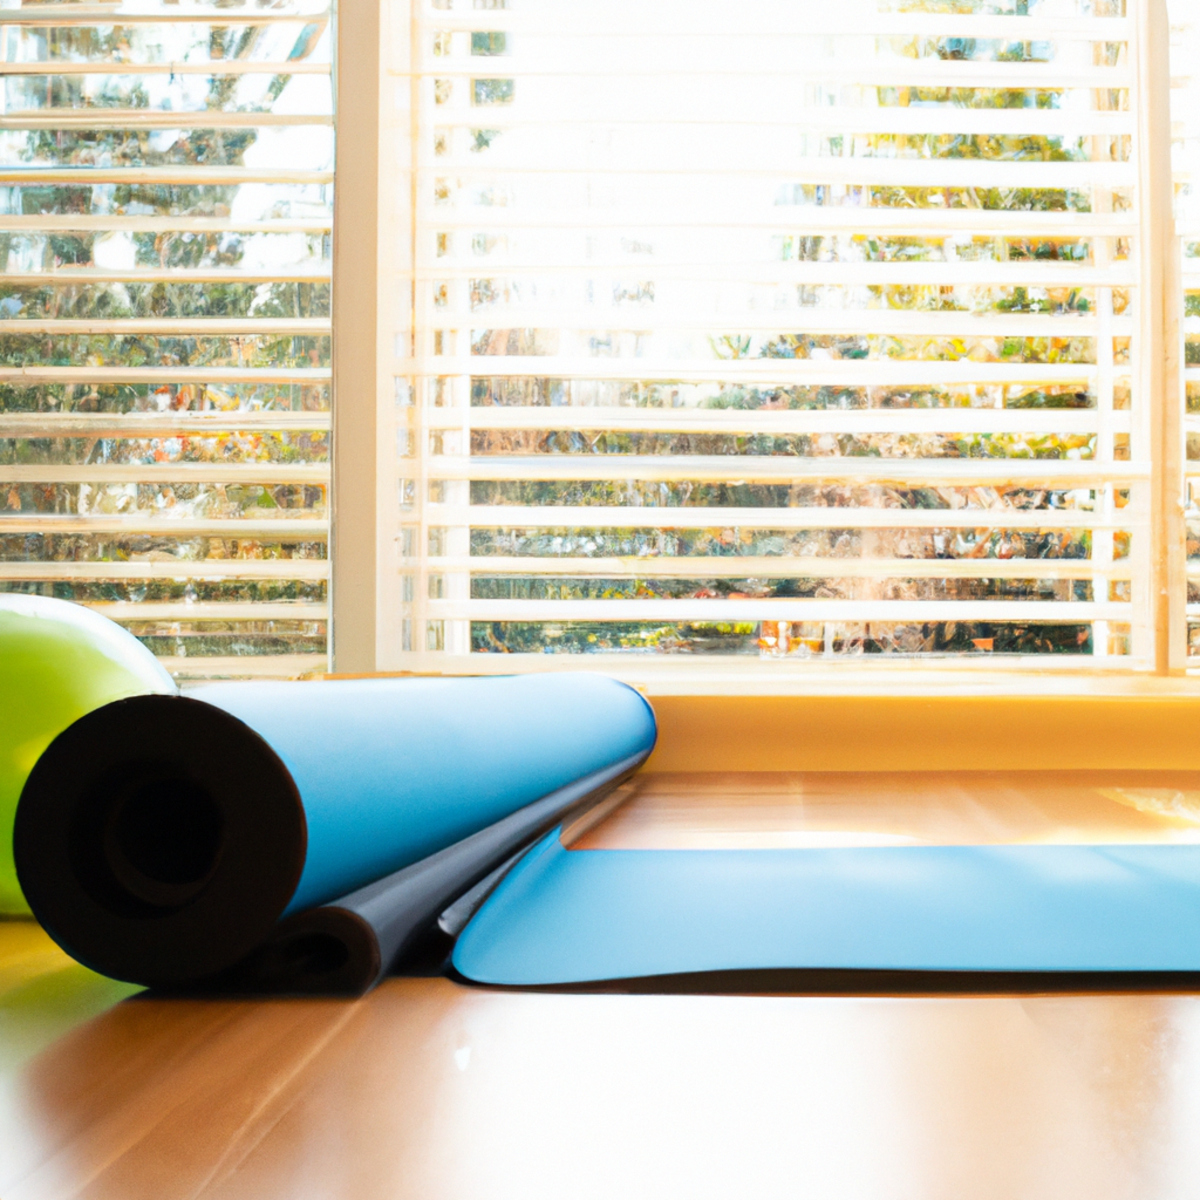 The photo features a yoga mat rolled out on a hardwood floor, with a pair of Pilates balls and a resistance band placed neatly beside it. In the background, a large window lets in natural light, illuminating the serene space. The scene is inviting and peaceful, encouraging readers to take a moment to focus on their physical and mental well-being.